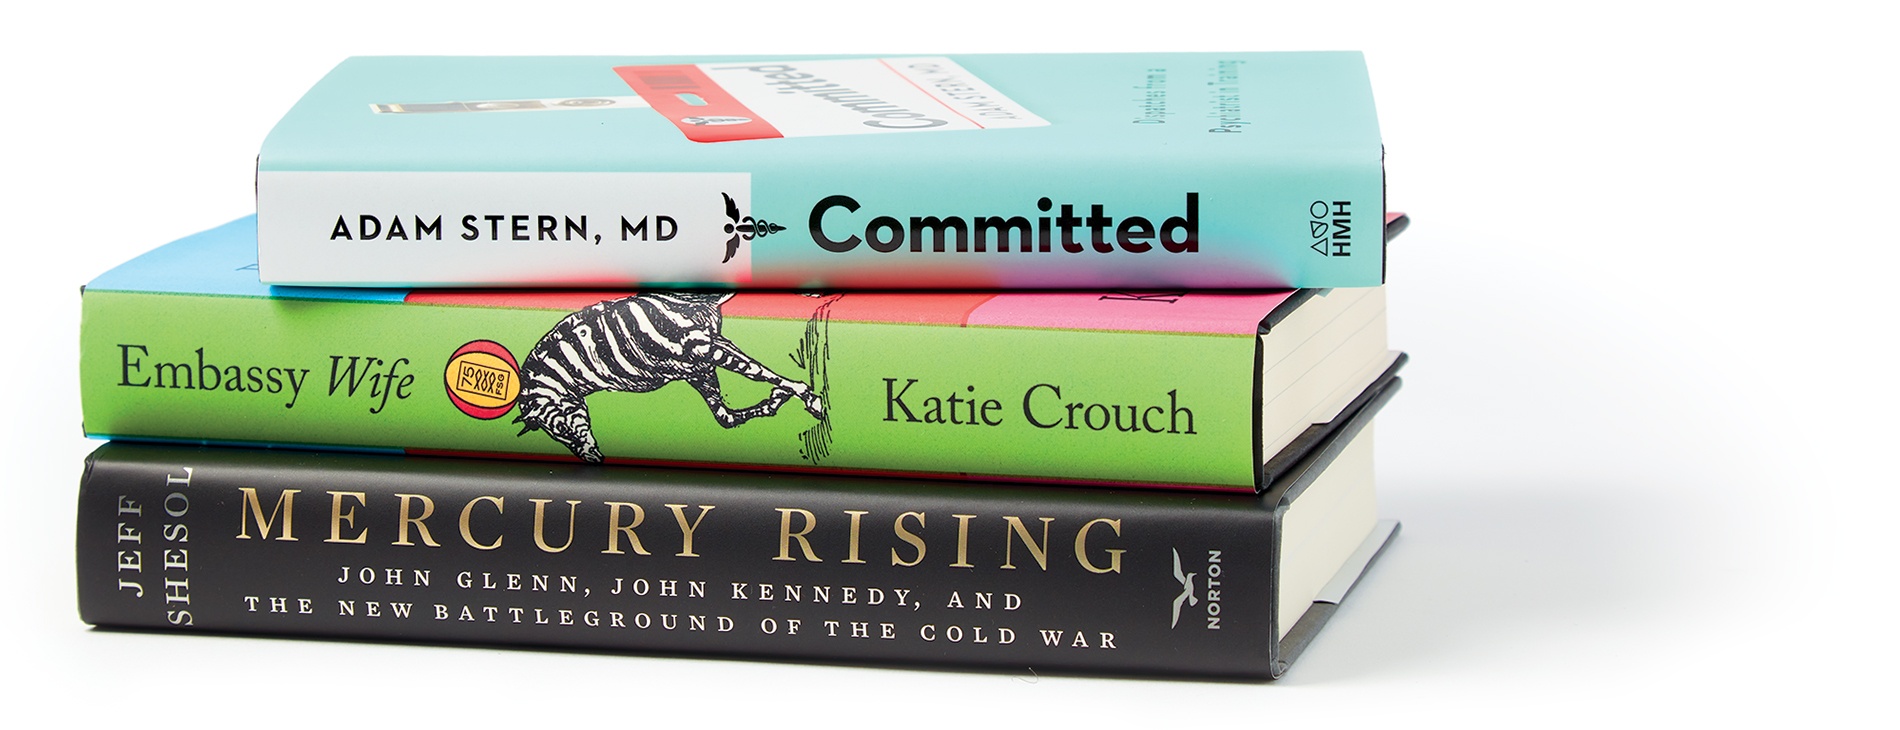 Image of Books by Adam Stern, Katie Crouch, and Jeff Shesol